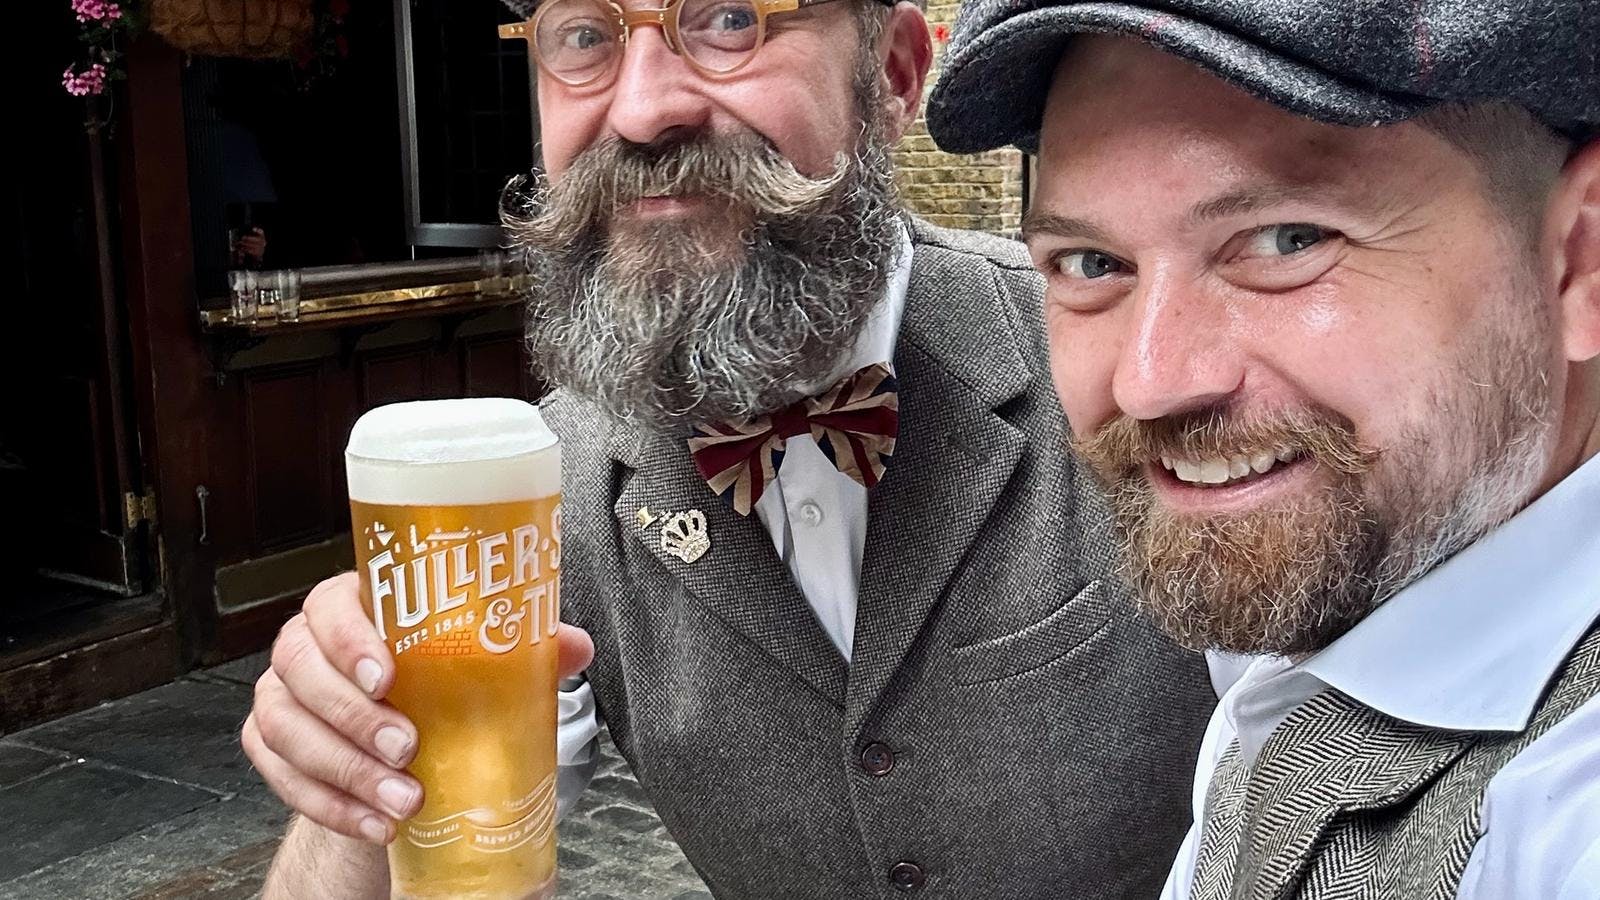 Jack and James enjoying a pint of Fullers London Pride ale at the Lamb & Flag Covent Garden